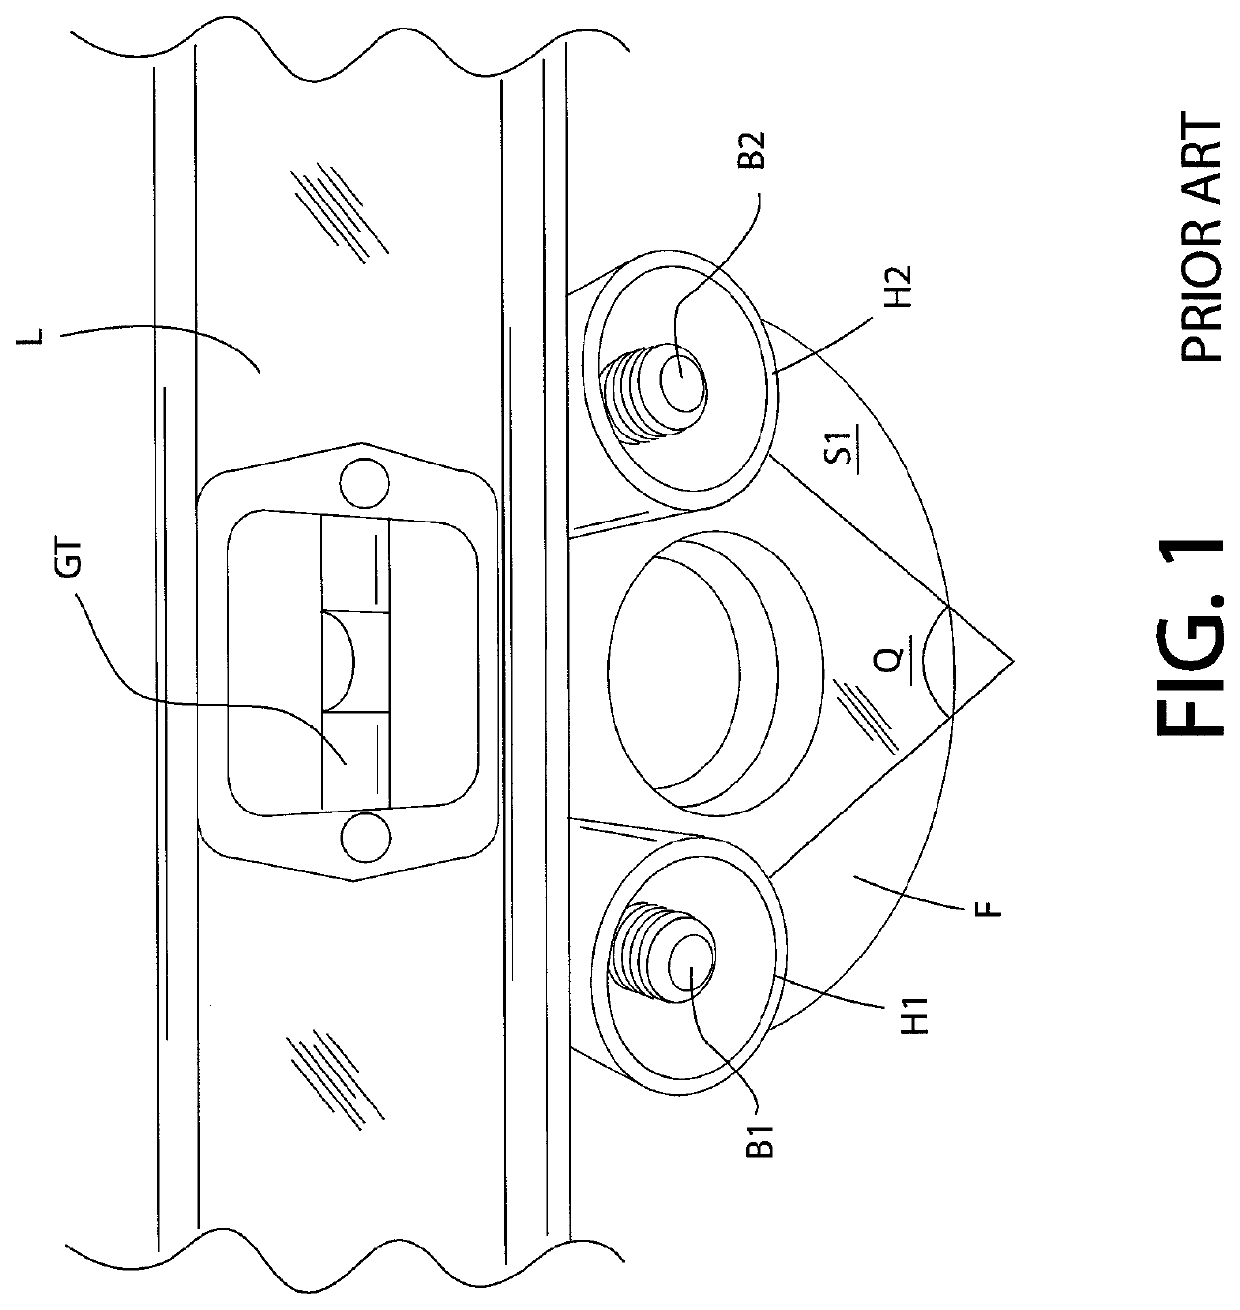 Flange leveling system for supporting and aligning a flange and related method